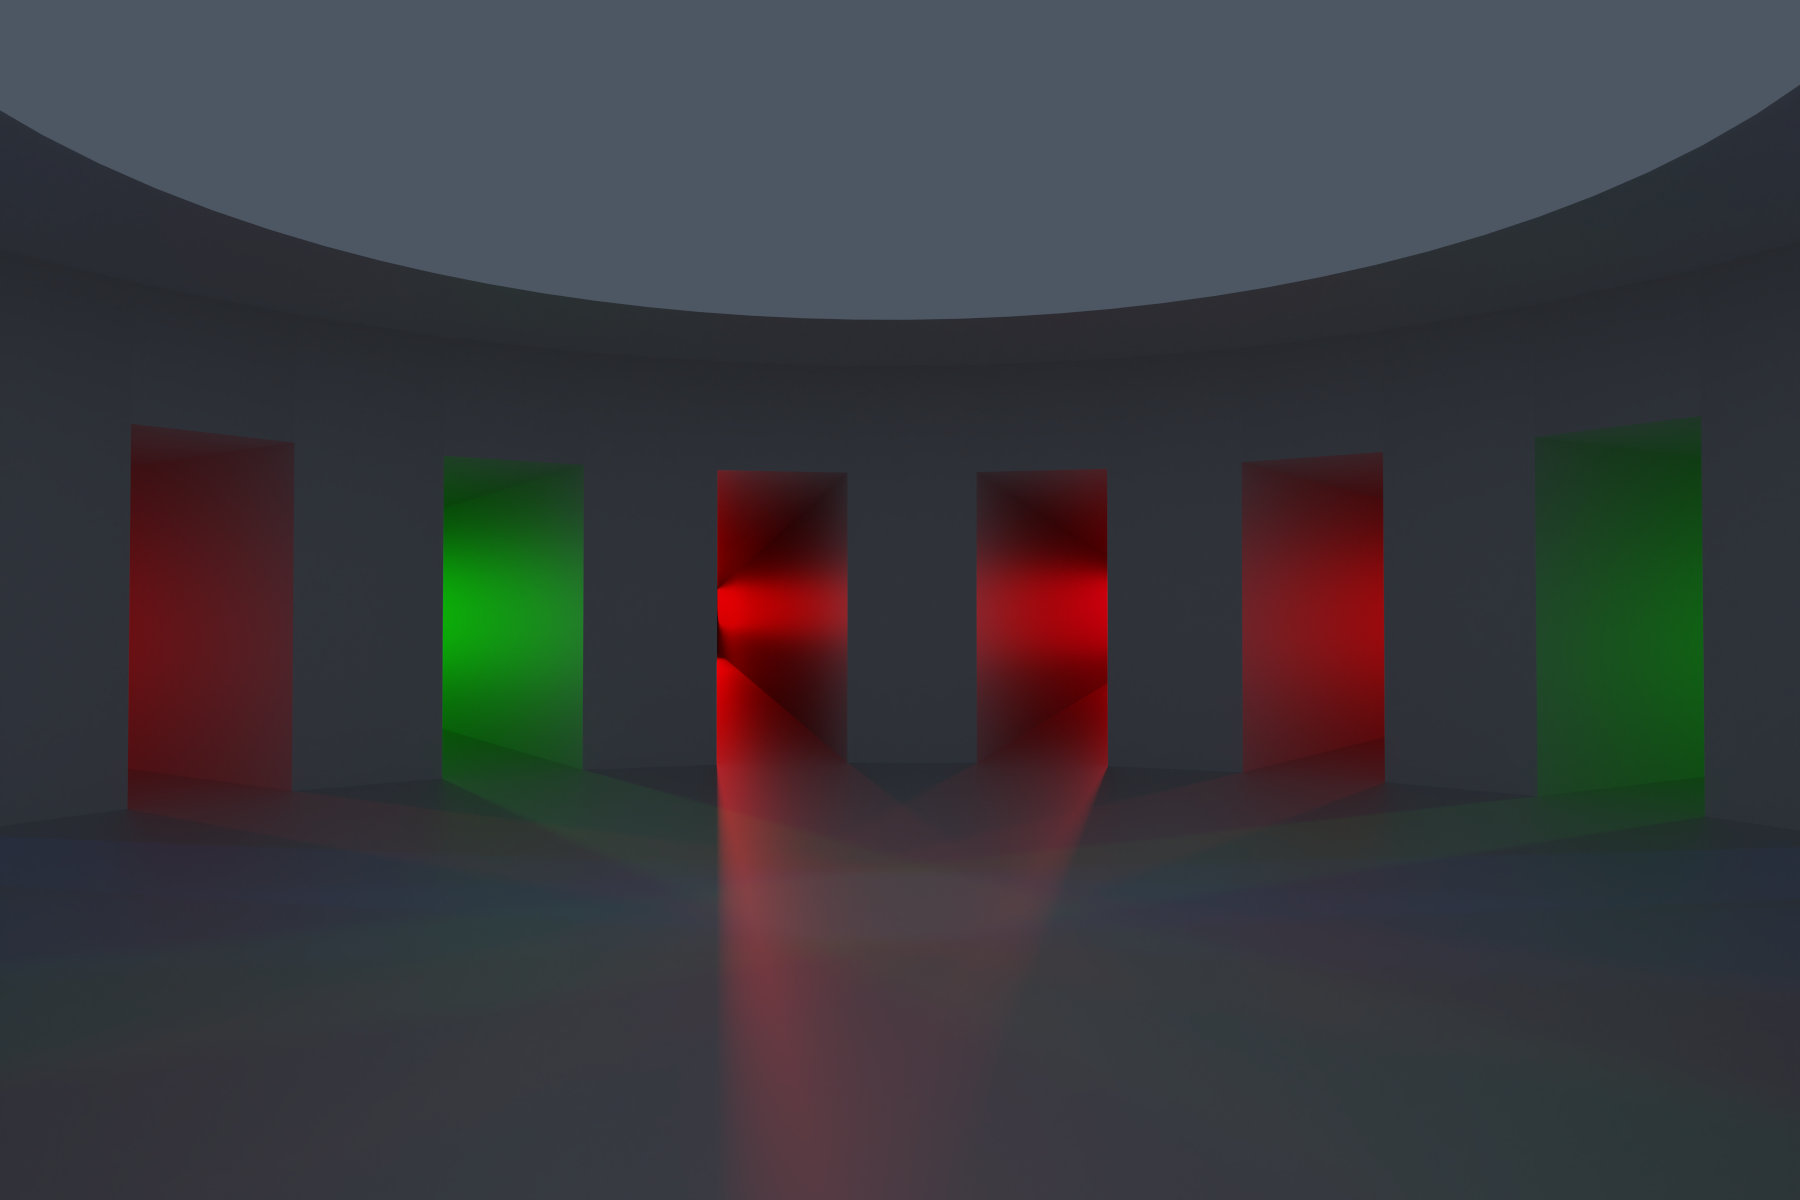 Virtual abstract scenery, Abstract digital art, Raytracing, Computer-rendered image, 2022. The viewer finds himself in a round room with several possible exits. Two of them are illuminated in green, the rest in red color. The question arises which exit is the best.